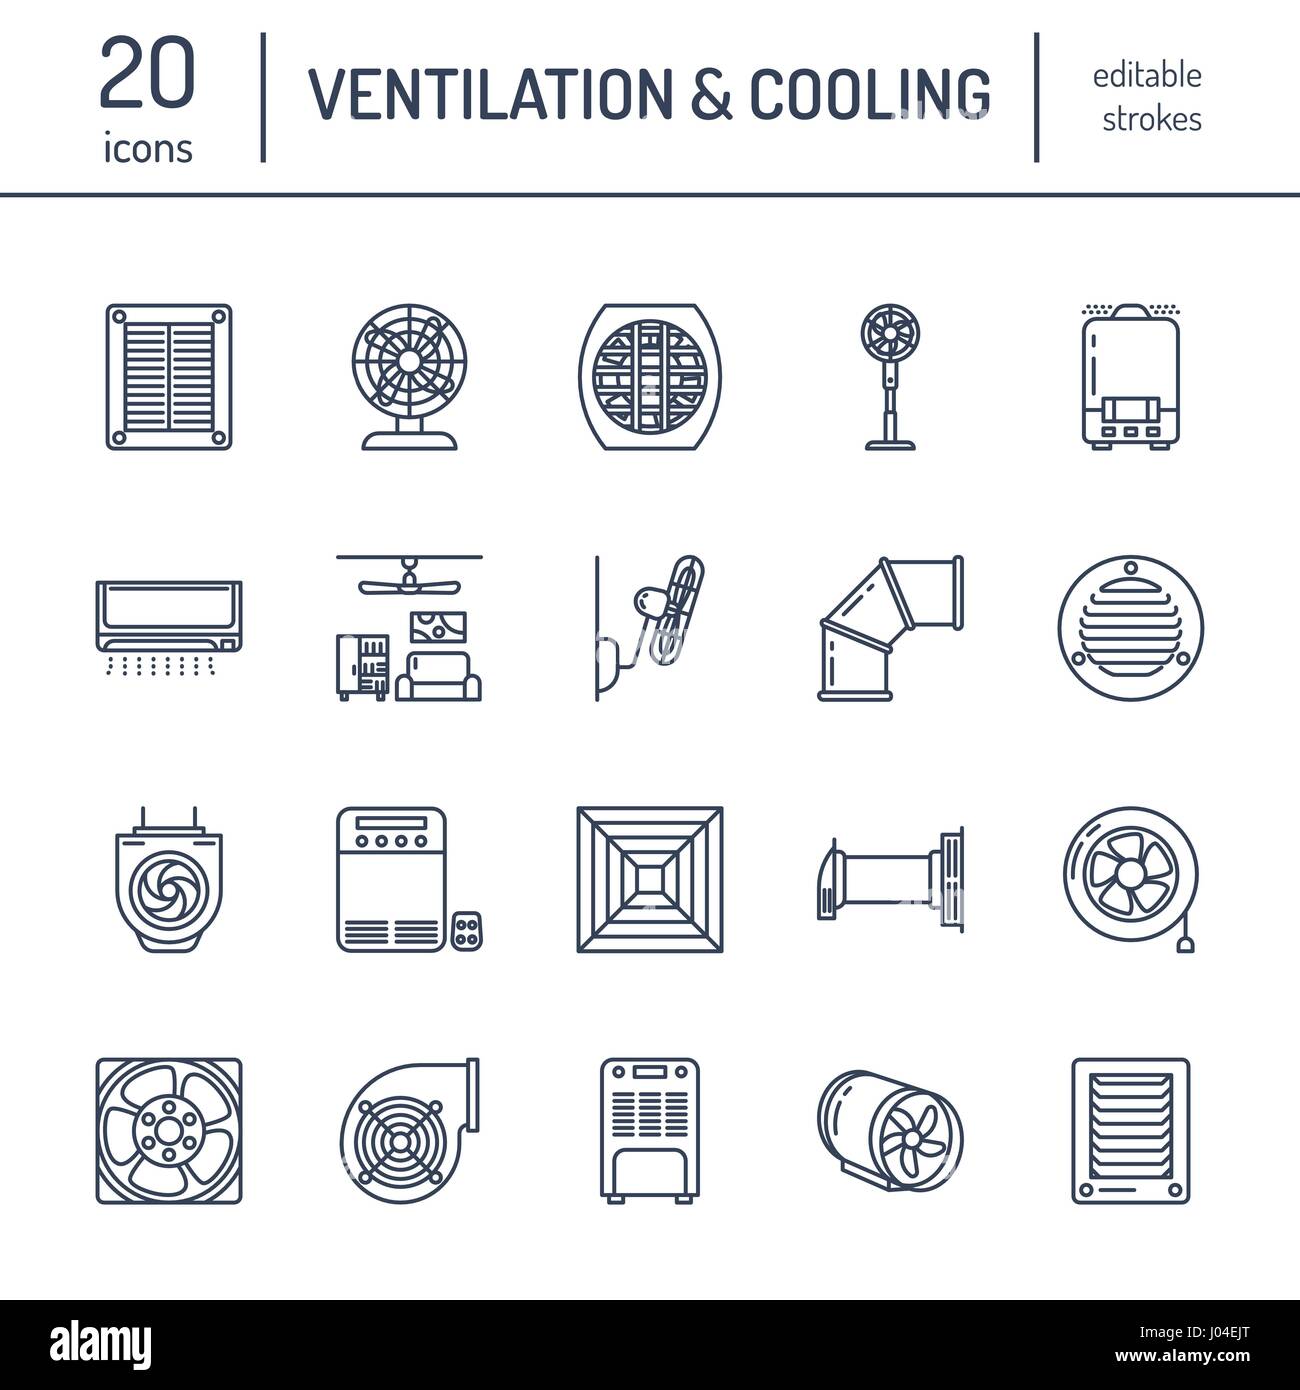 Ventilation equipment line icons. Air conditioning, cooling appliances, exhaust fan. Household and industrial ventilator thin linear signs for store Stock Vector